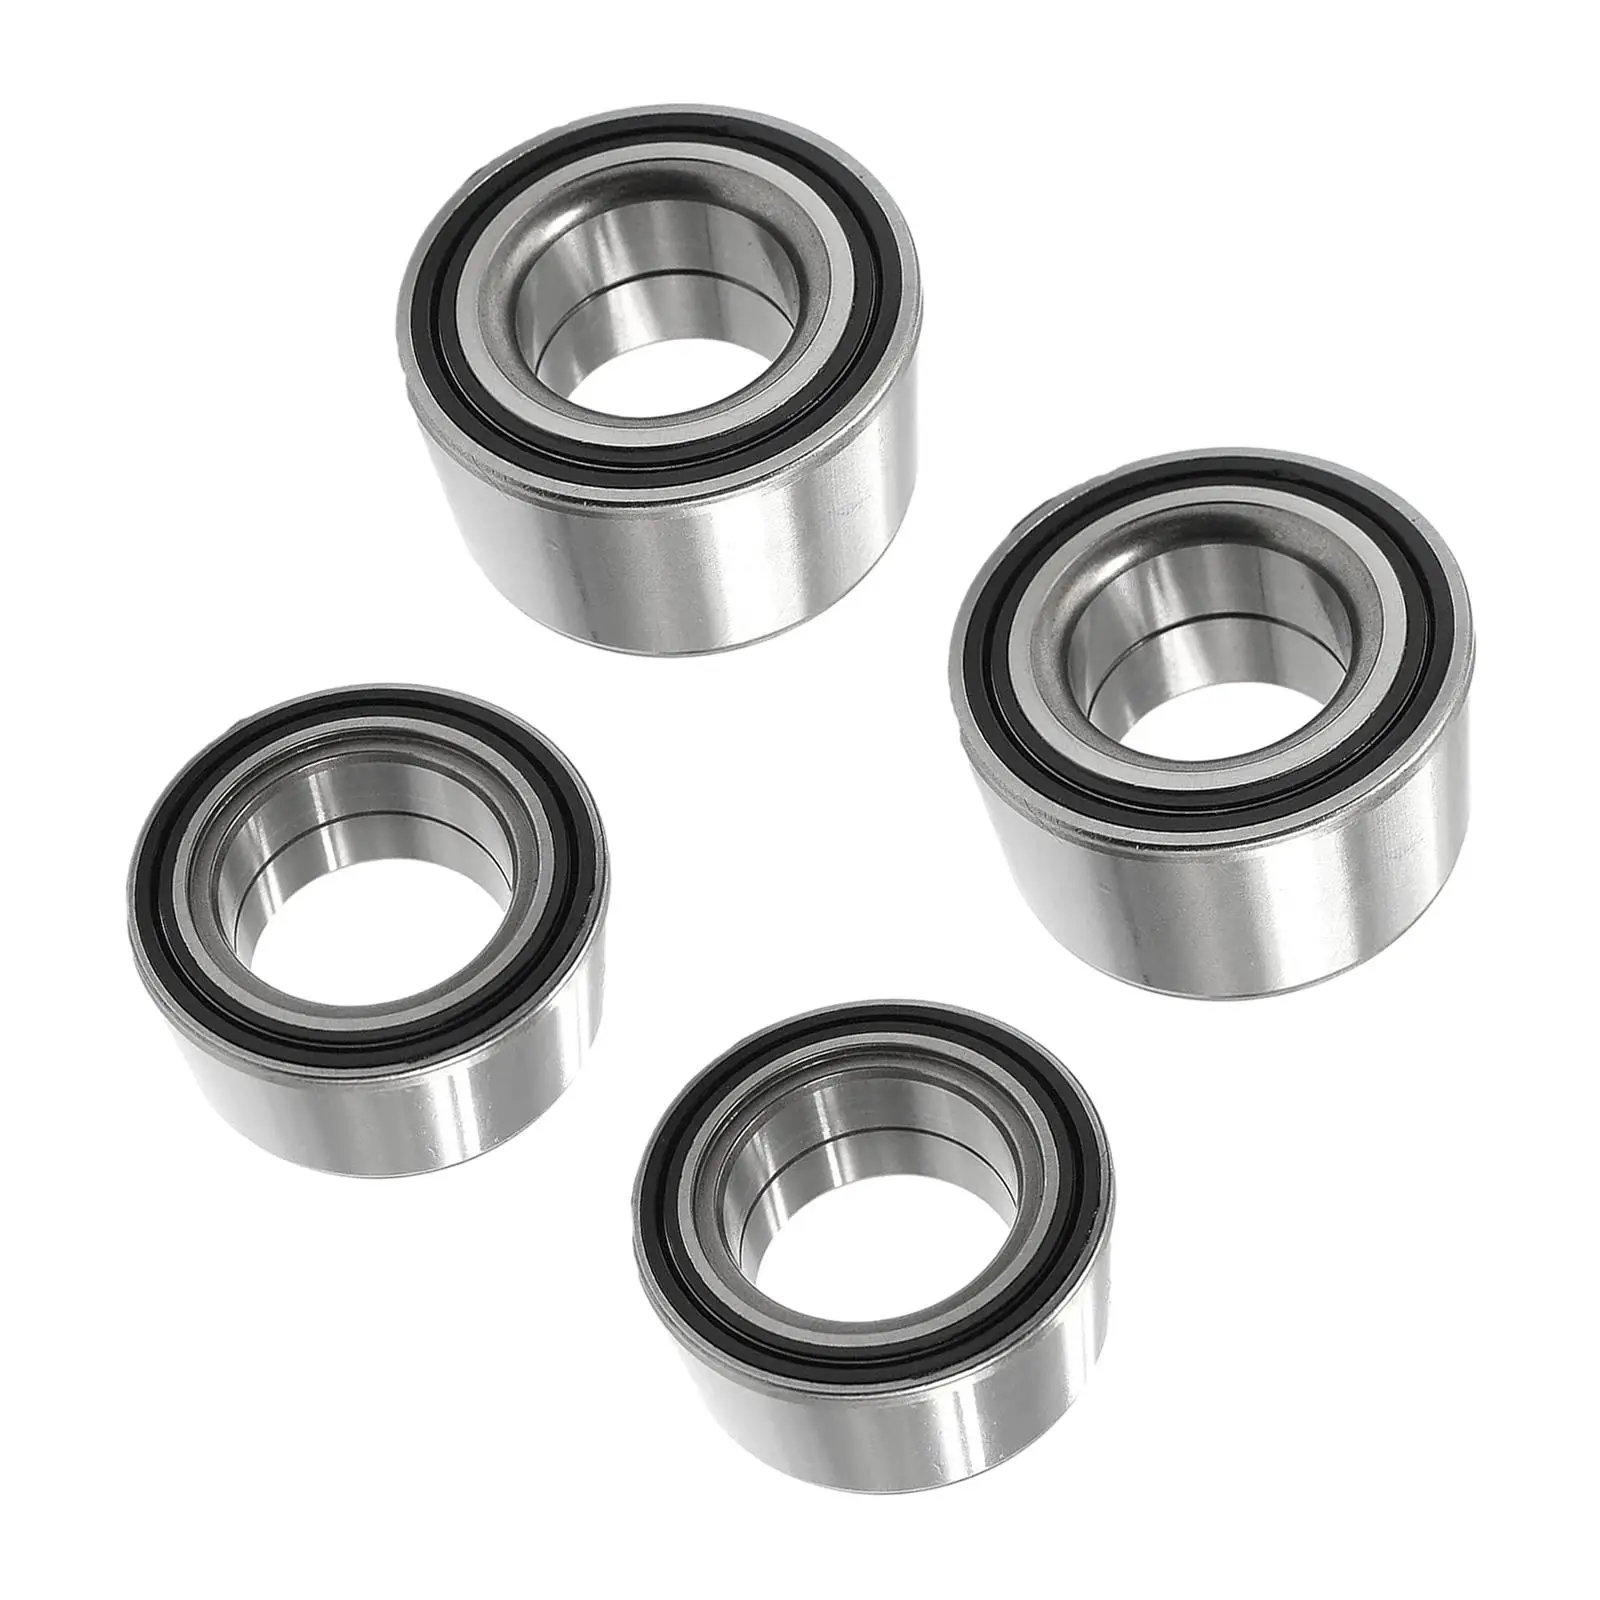 4 Pieces Front and Rear Wheel Bearings 3514699 for Polaris 800 570 Automotive Accessories